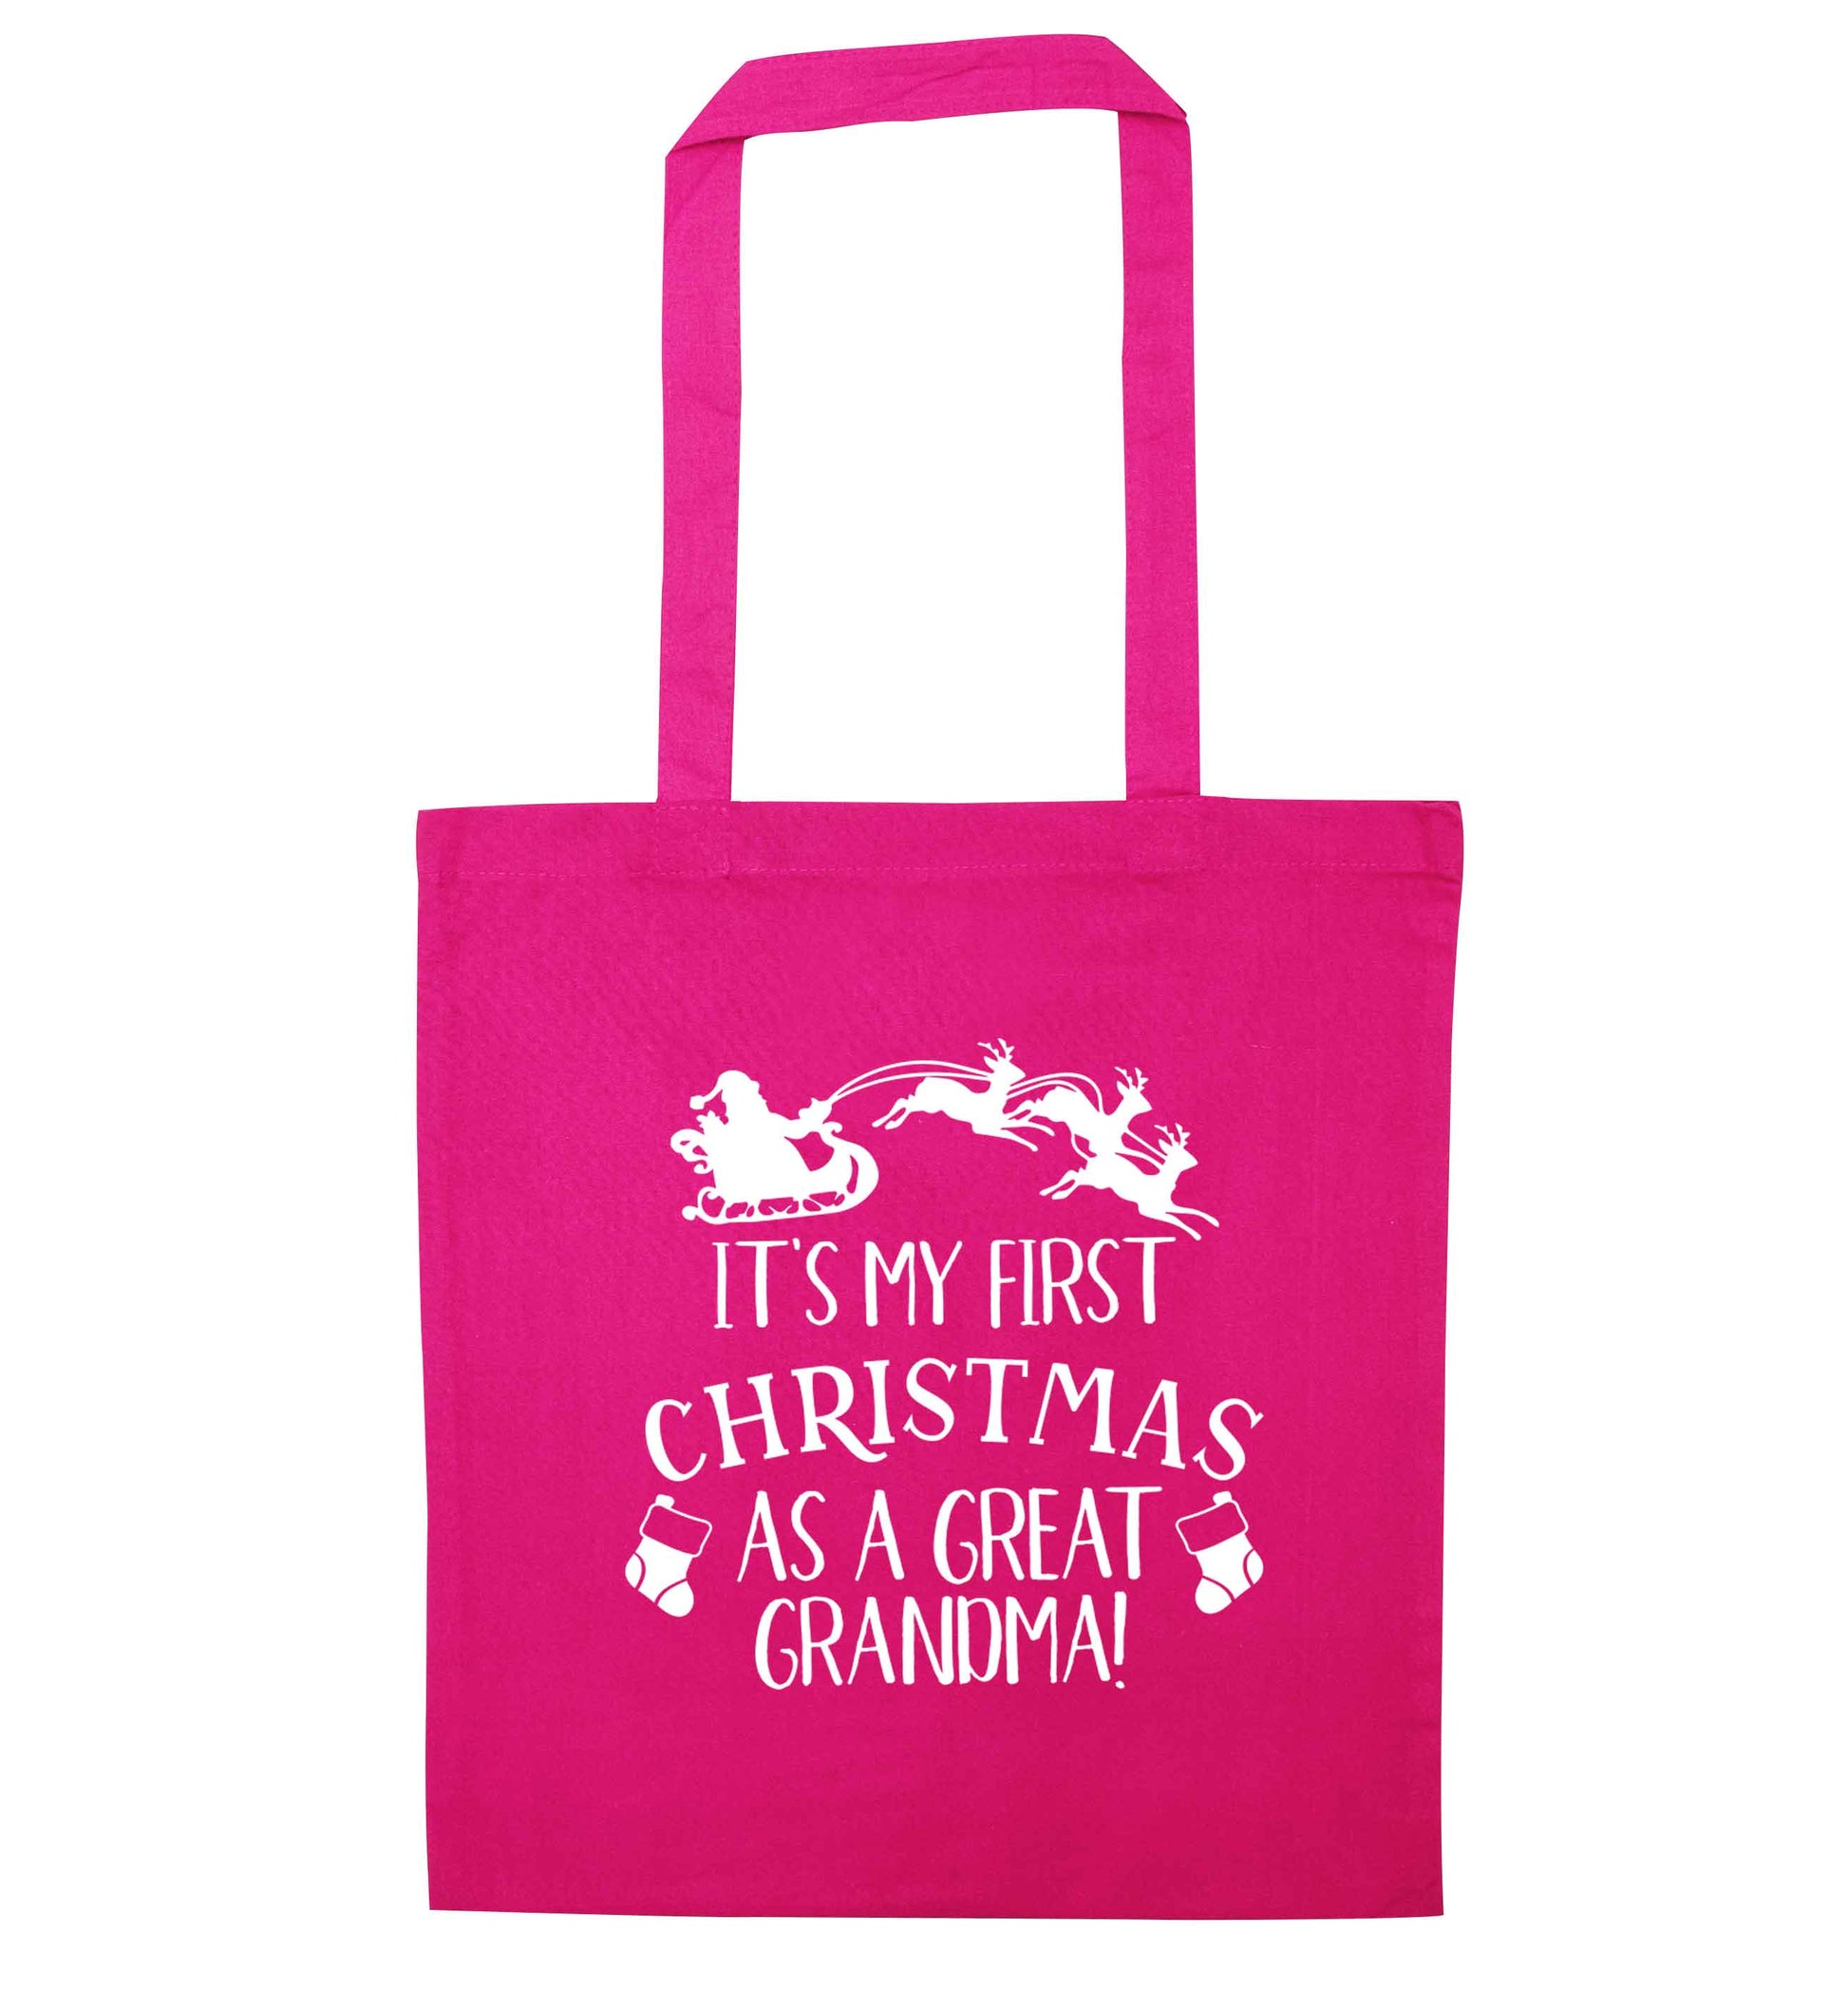 It's my first Christmas as a great grandma! pink tote bag